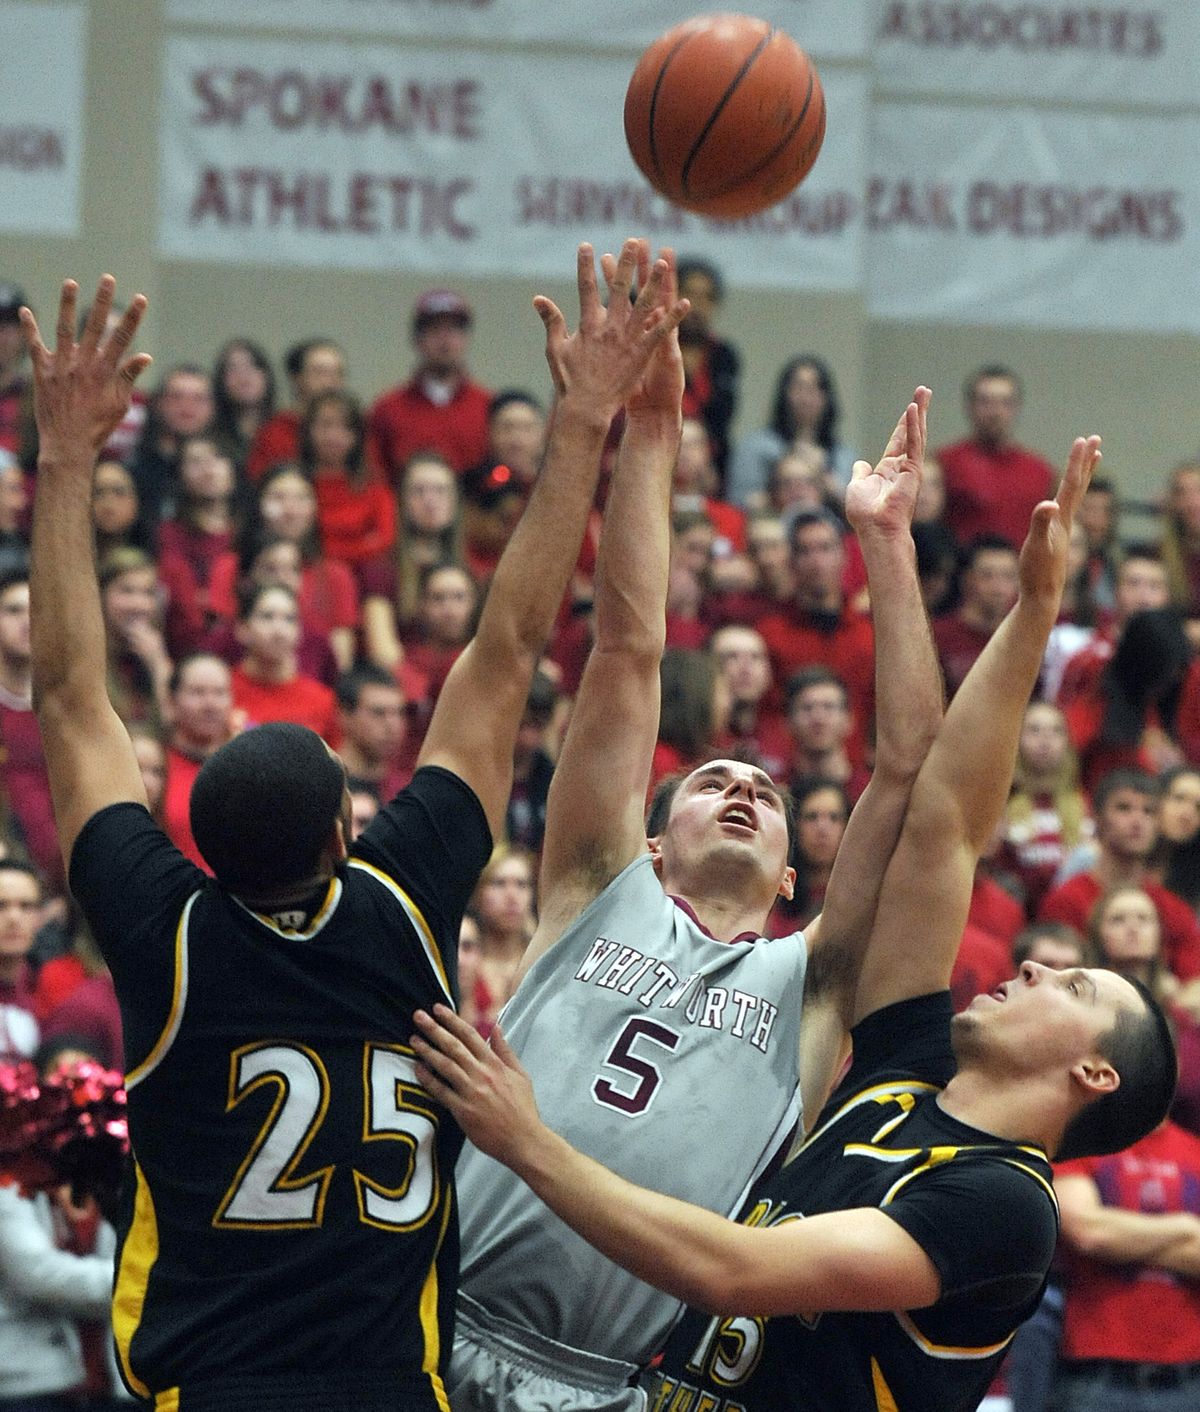 Whitworth’s Mike Taylor (5) slices through PLU’s defense of Victor Bull (25) and Kai Hoyt for a shot. (Dan Pelle)